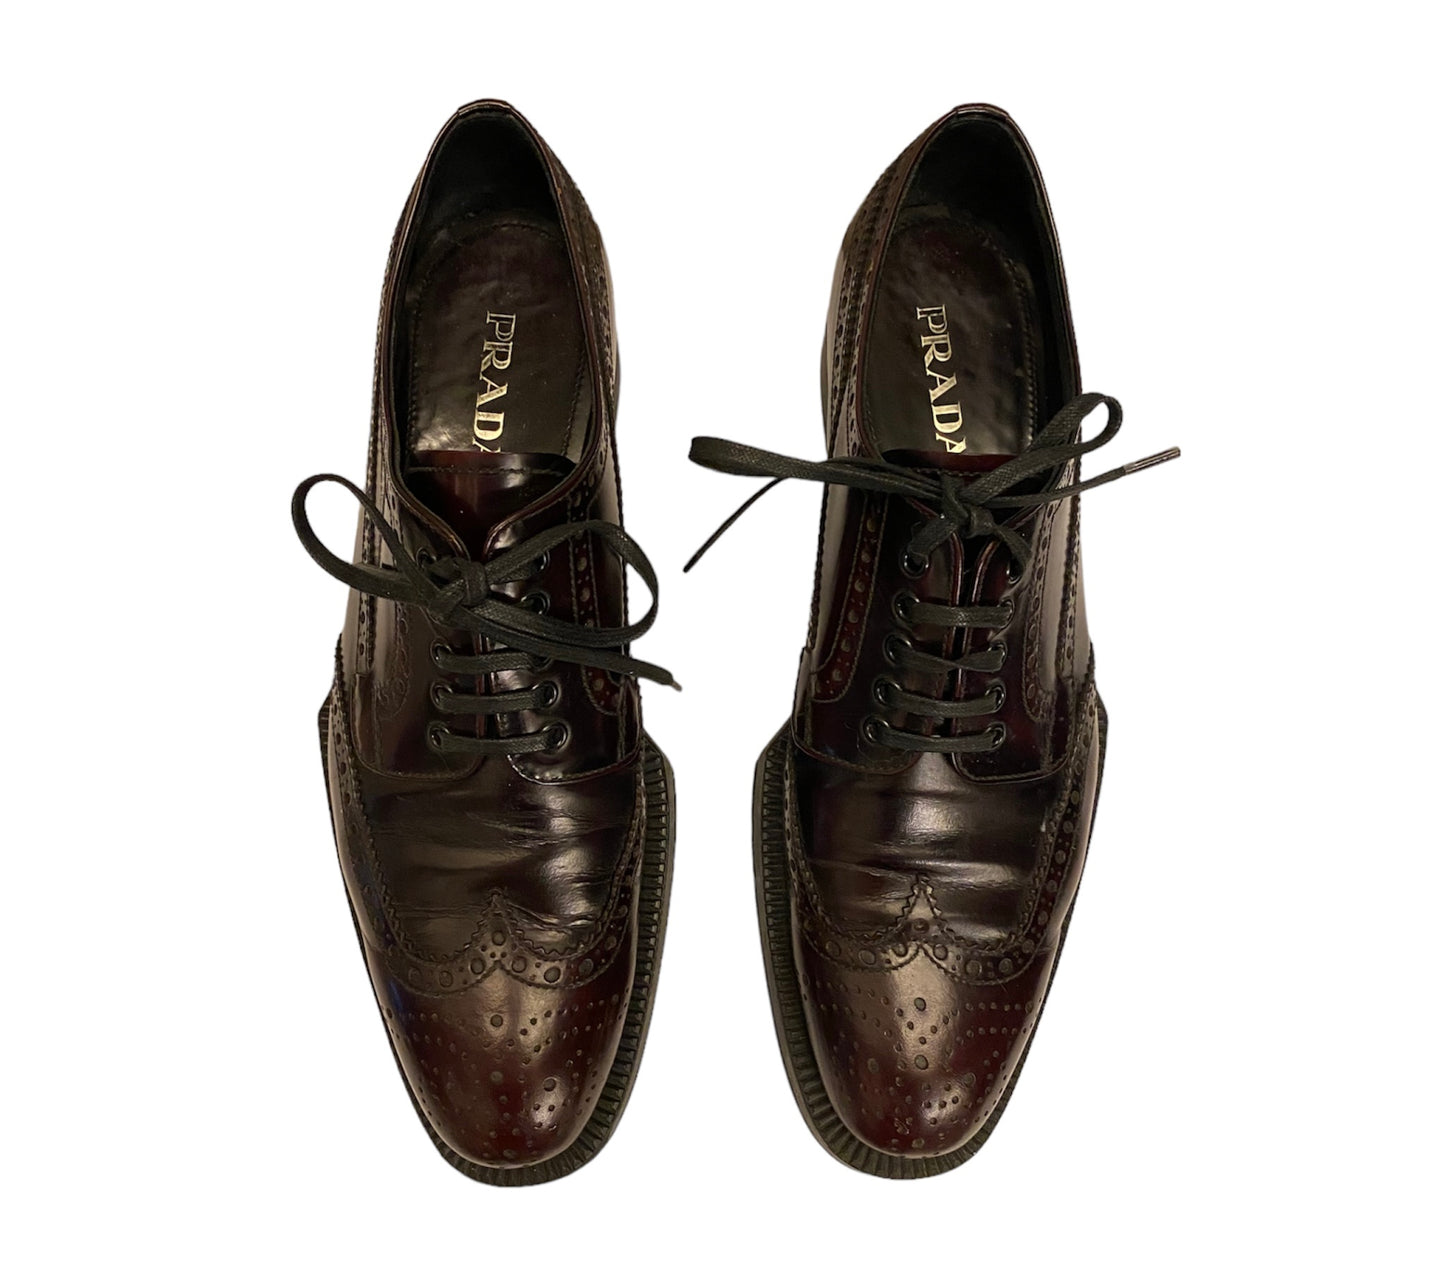 PRADA Leather Lace-up Shoes Size 37